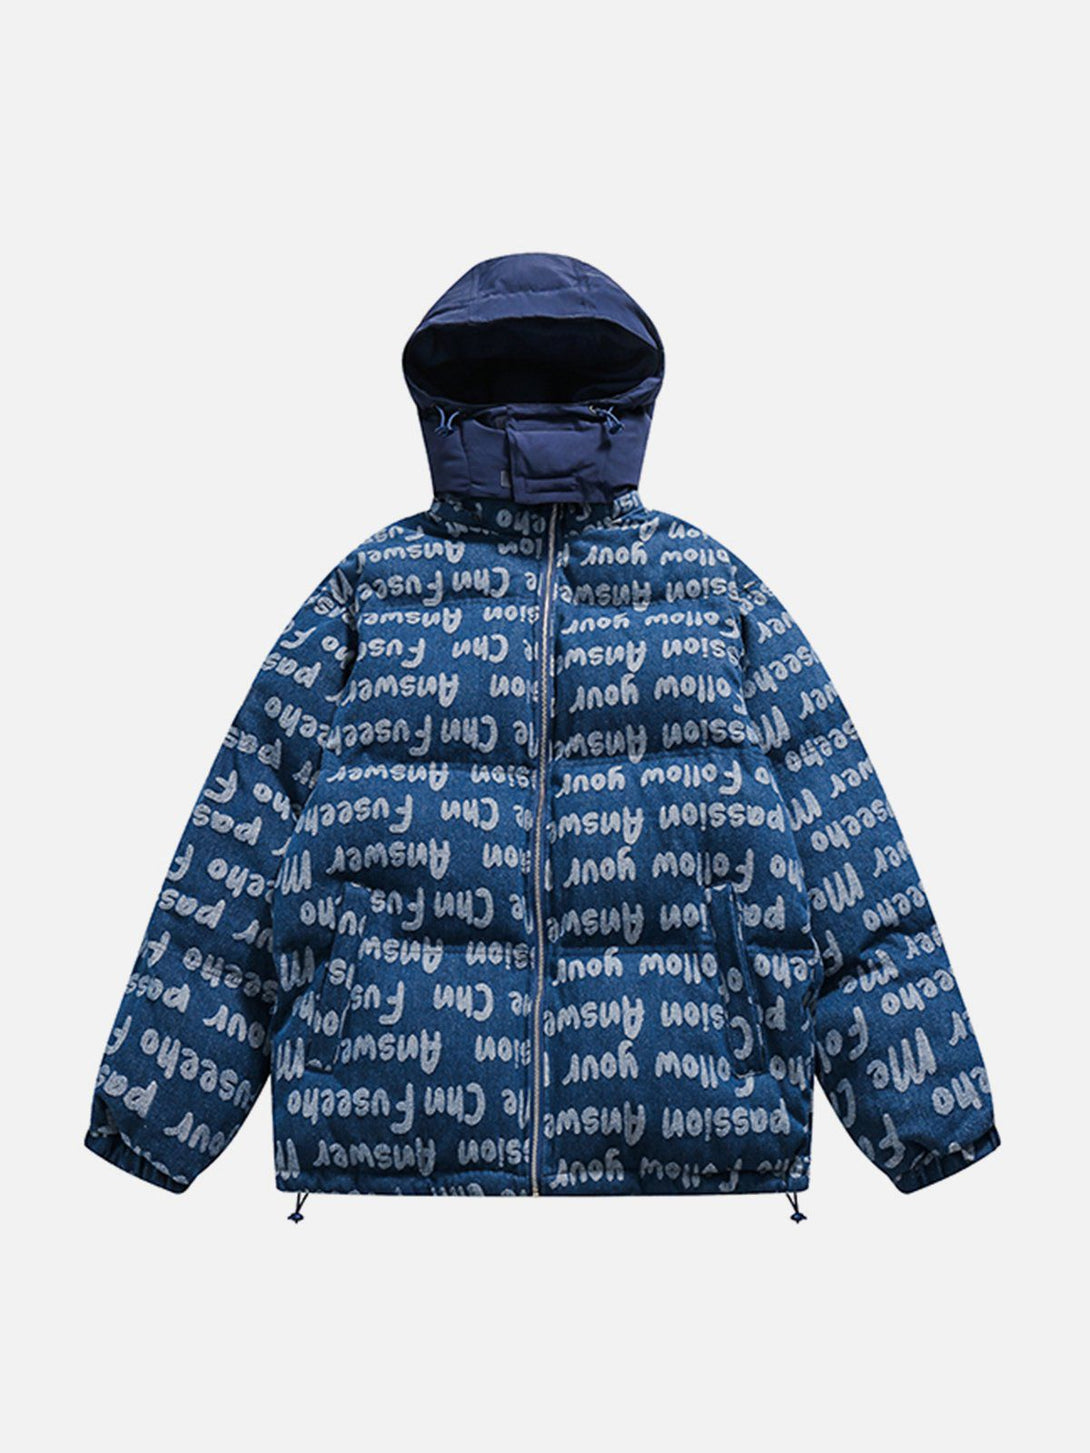 Majesda® - Fully Printed Removable Hat Winter Coat outfit ideas, streetwear fashion - majesda.com